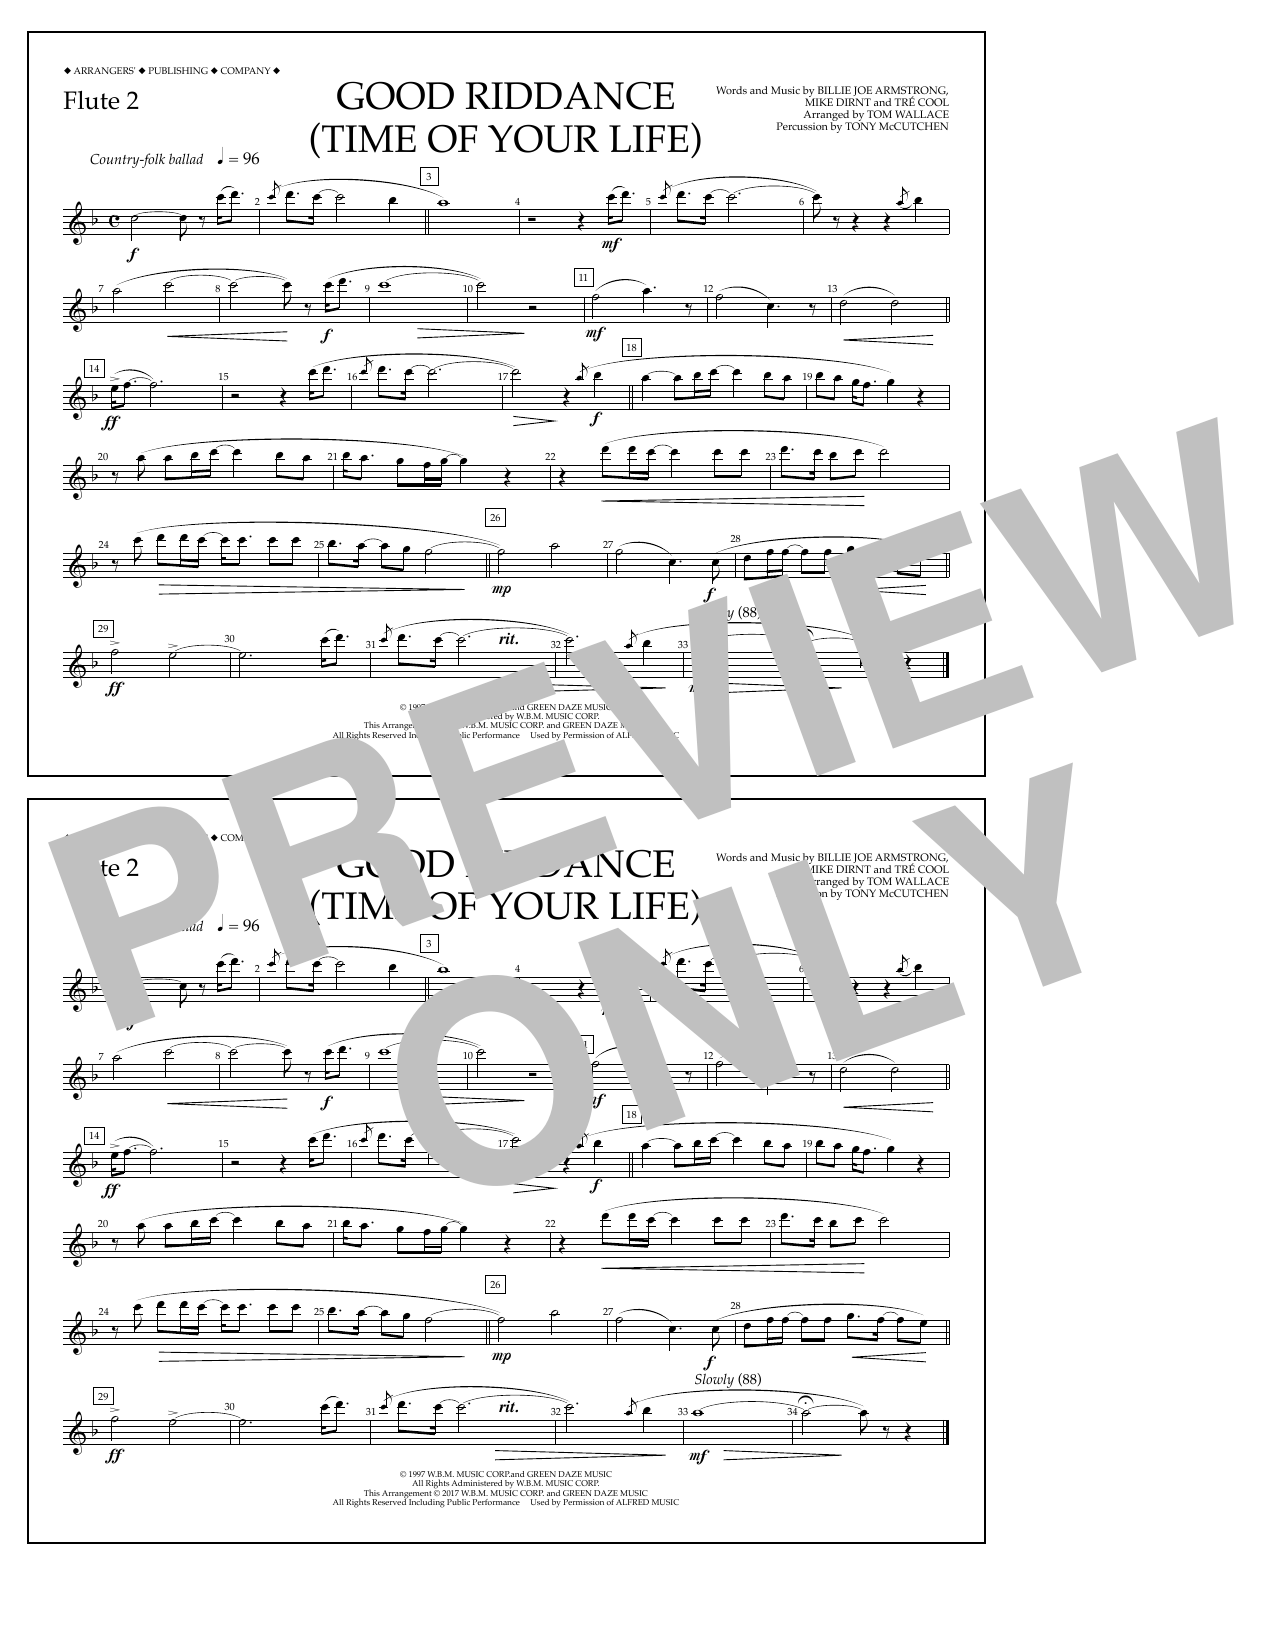 Download Tom Wallace Good Riddance (Time of Your Life) - Flu Sheet Music